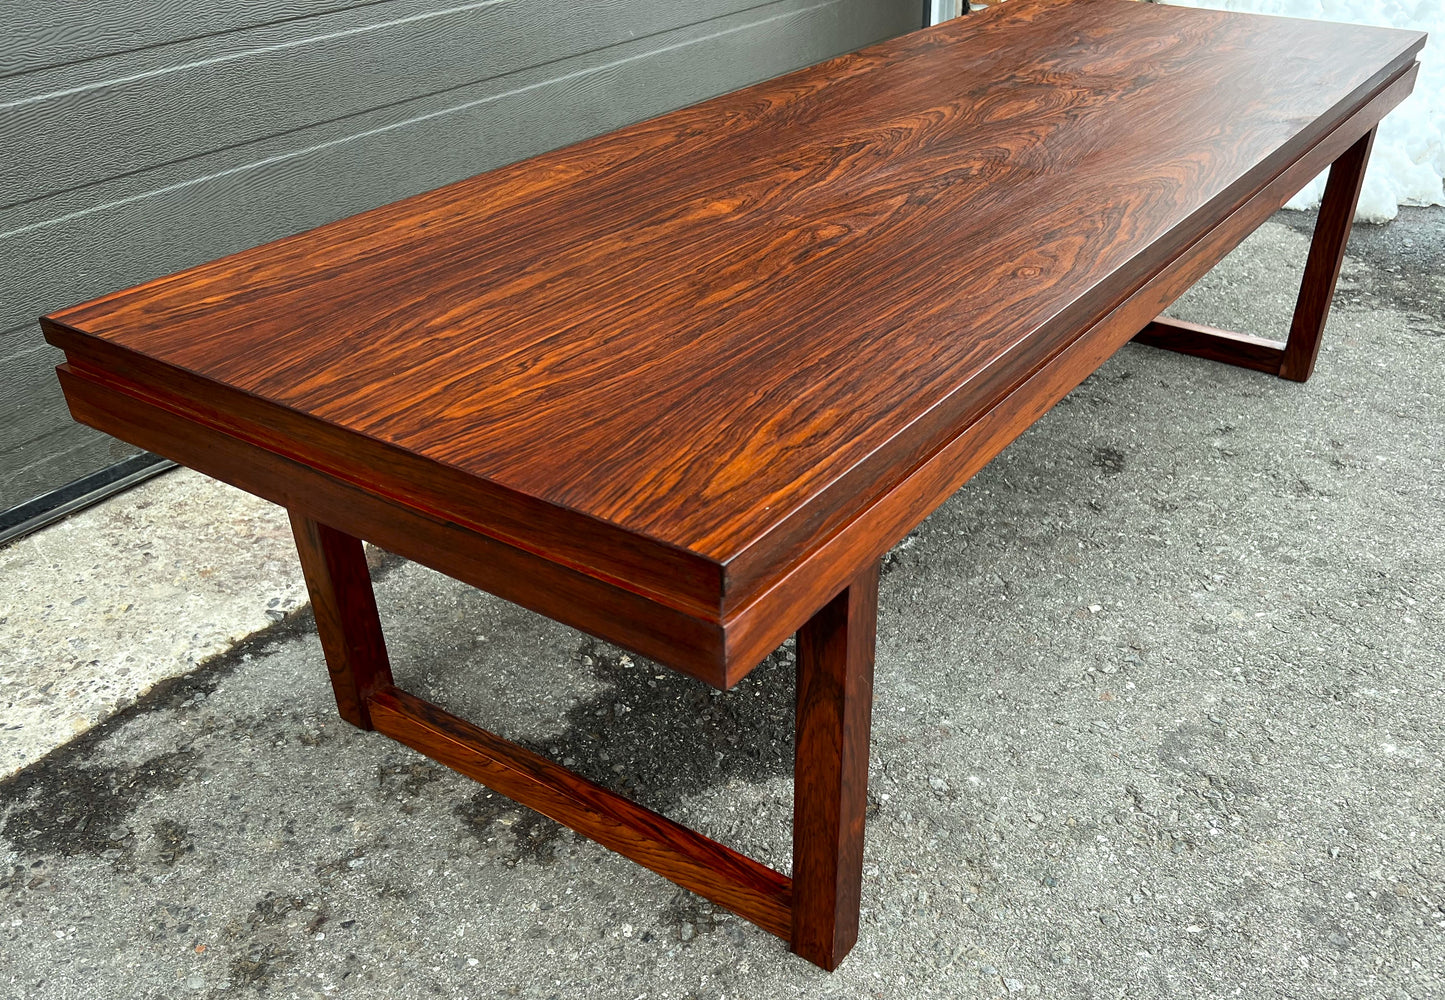 REFINISHED Danish Mid Century Modern Rosewood Coffee Table, Large & Narrow